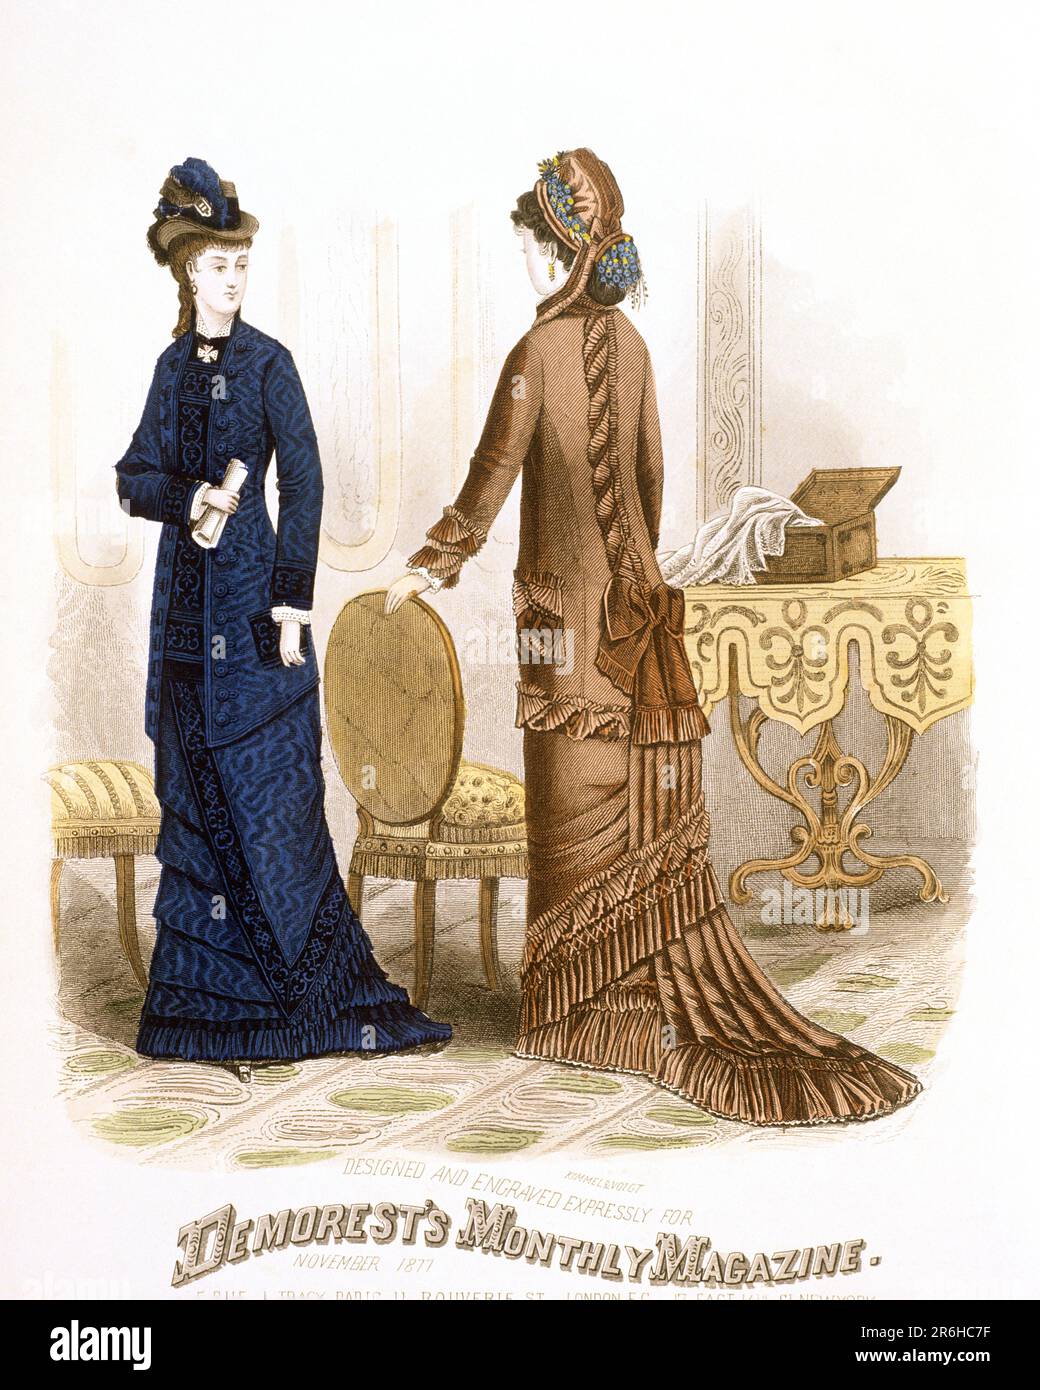 1870s DRAWING FROM DEMORESTS MONTHLY MAGAZINE TWO WOMEN STANDING IN PARLOR WEARING DRESSES AND HATS  - ko4267 NAW001 HARS HOME LIFE COPY SPACE FULL-LENGTH LADIES PERSONS INSPIRATION ENTERTAINMENT BUSINESSWOMAN DRESSES SUCCESS SELLING PATTERNS STYLES STRATEGY CUSTOMER SERVICE AND NETWORKING CHOICE EXCITEMENT KNOWLEDGE RECREATION SUCCESSFUL PRIDE OPPORTUNITY TO OCCUPATIONS CONCEPTUAL MONTHLY 1870s ESTABLISHED PARLOR STYLISH BUSINESSWOMEN CURTIS DIY 1860 ARBITER CREATIVITY DRESSMAKING FASHIONS INVENTOR MID-ADULT MID-ADULT WOMAN MILLINER ORDINARY YOUNG ADULT WOMAN CAUCASIAN ETHNICITY MASS-PRODUCED Stock Photo